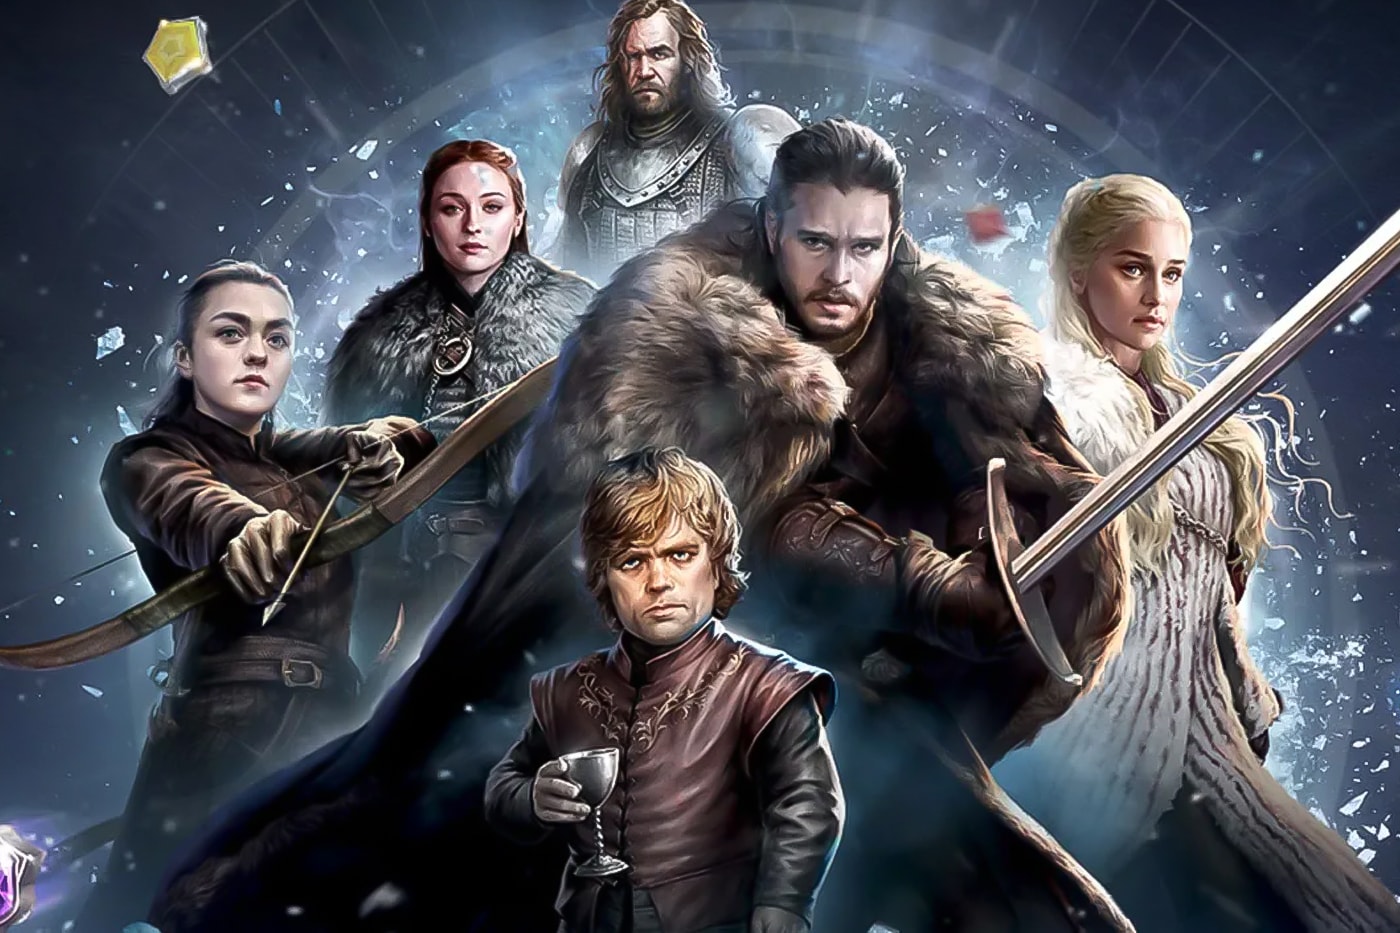 Game of Thrones Mobile RPG Legends announcement zynga game developer studio announcement house of the dragon app